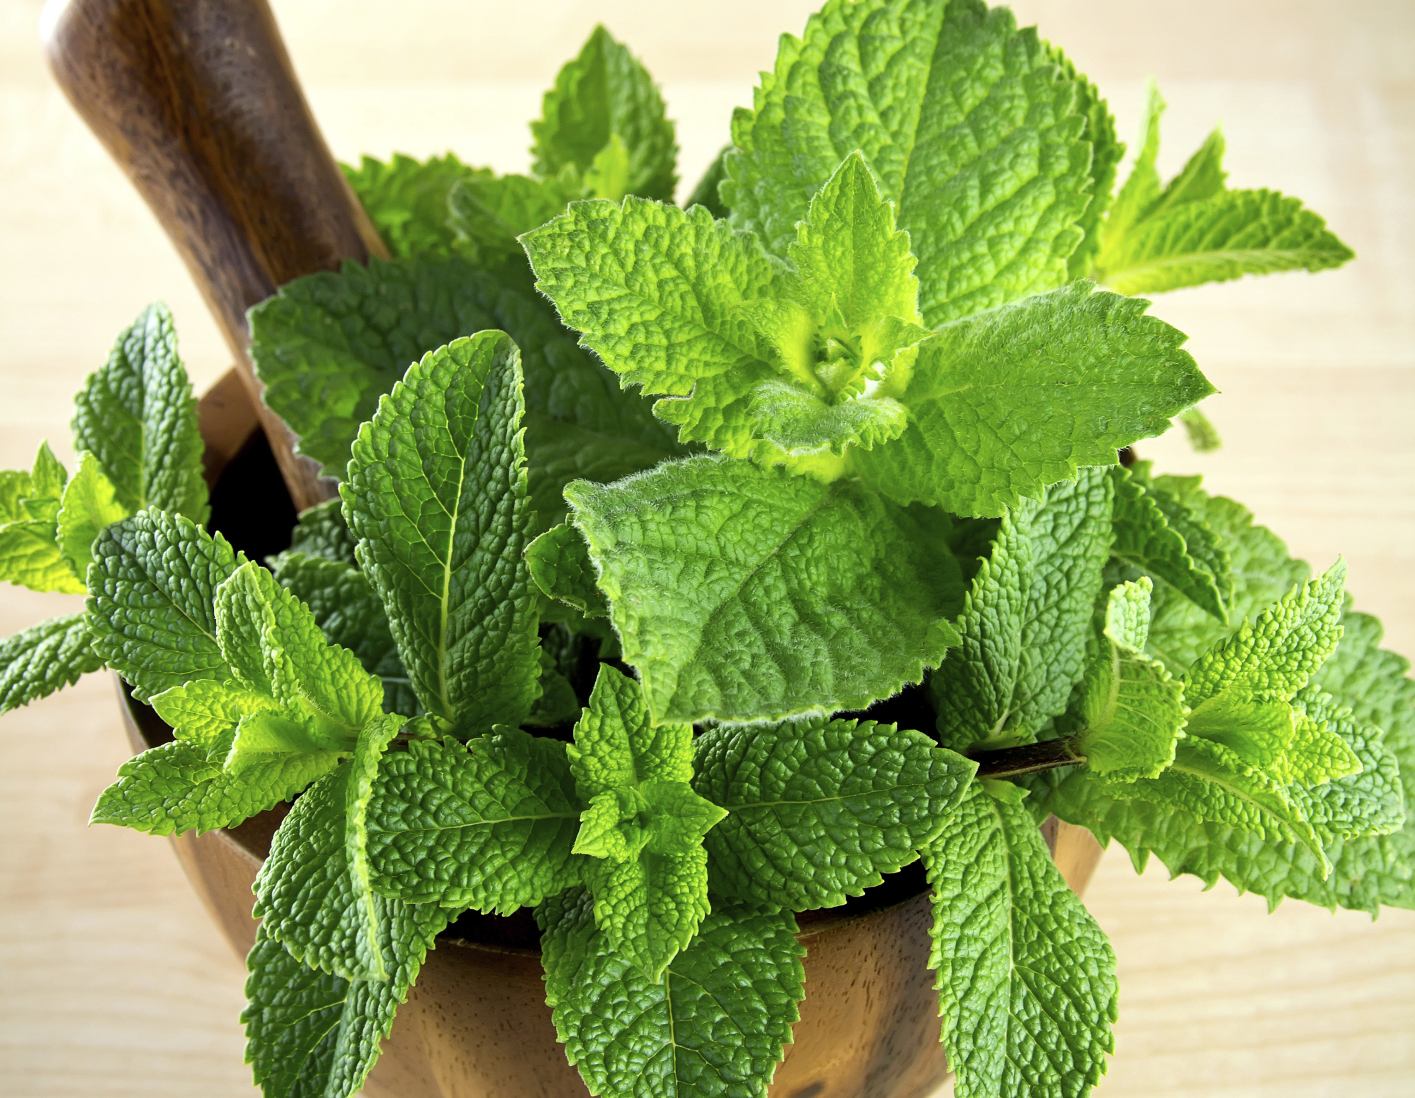 Regularly smelling peppermint may help decrease hunger and, consequently, caloric intake. Researchers believe the strong scent is distracting and helps keeps a person’s mind off of their appetite.